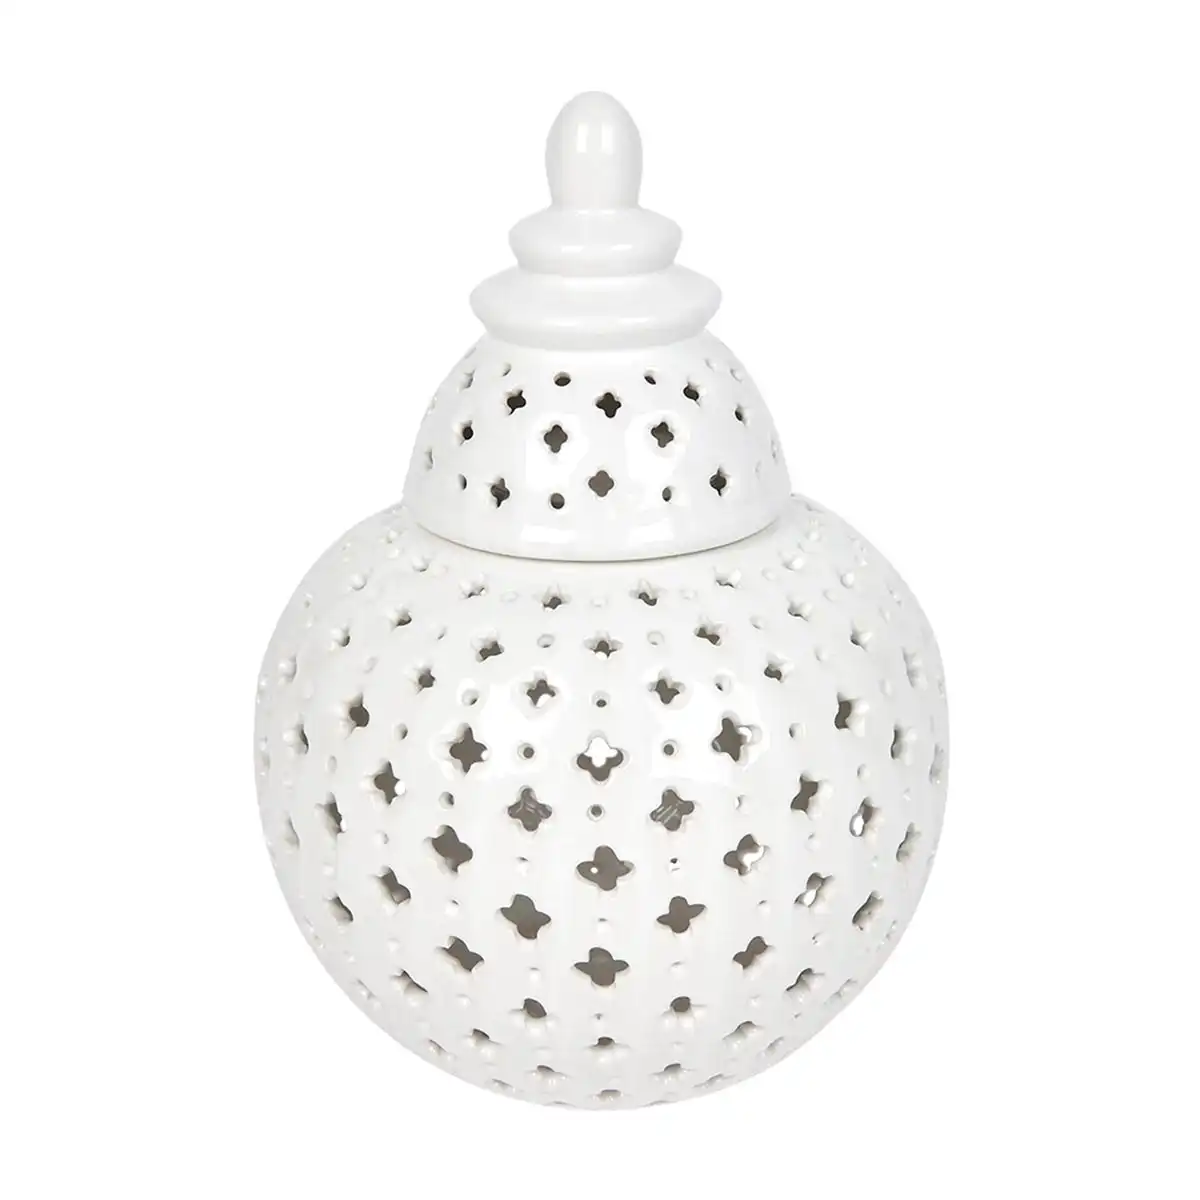 Miccah Temple Jar - Small White